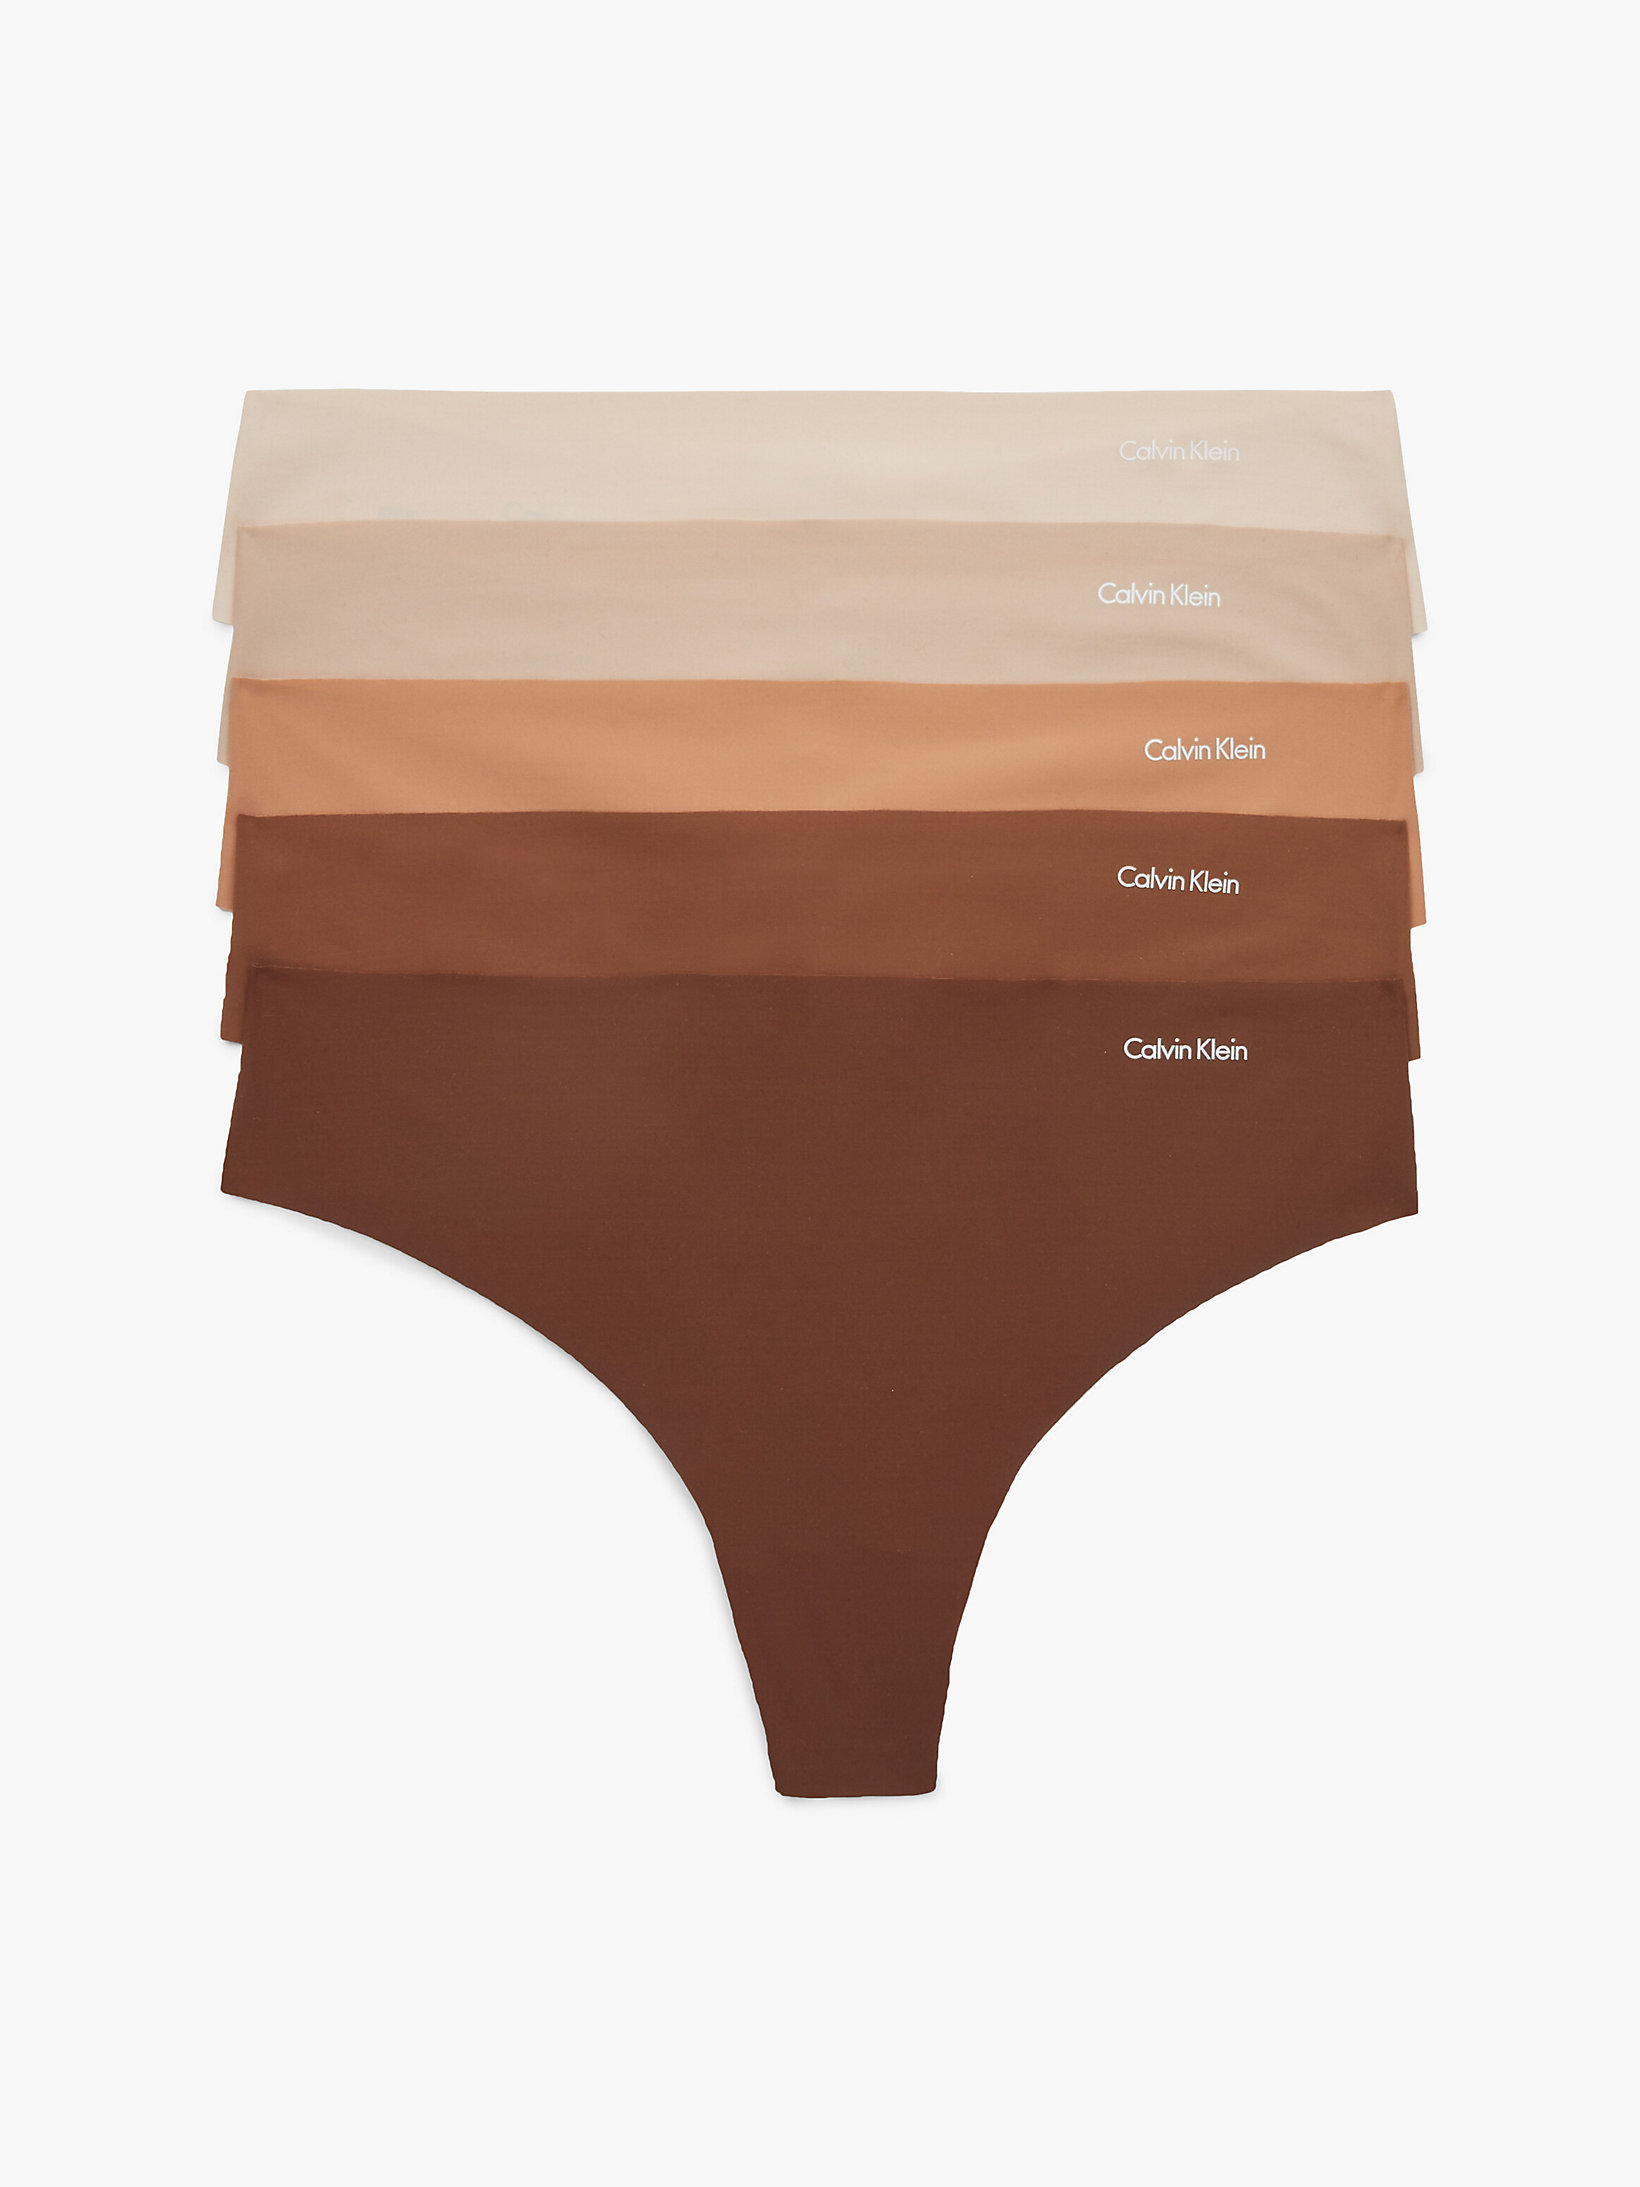 B/c/s/s/u 5 Pack Thongs - Invisibles undefined women Calvin Klein